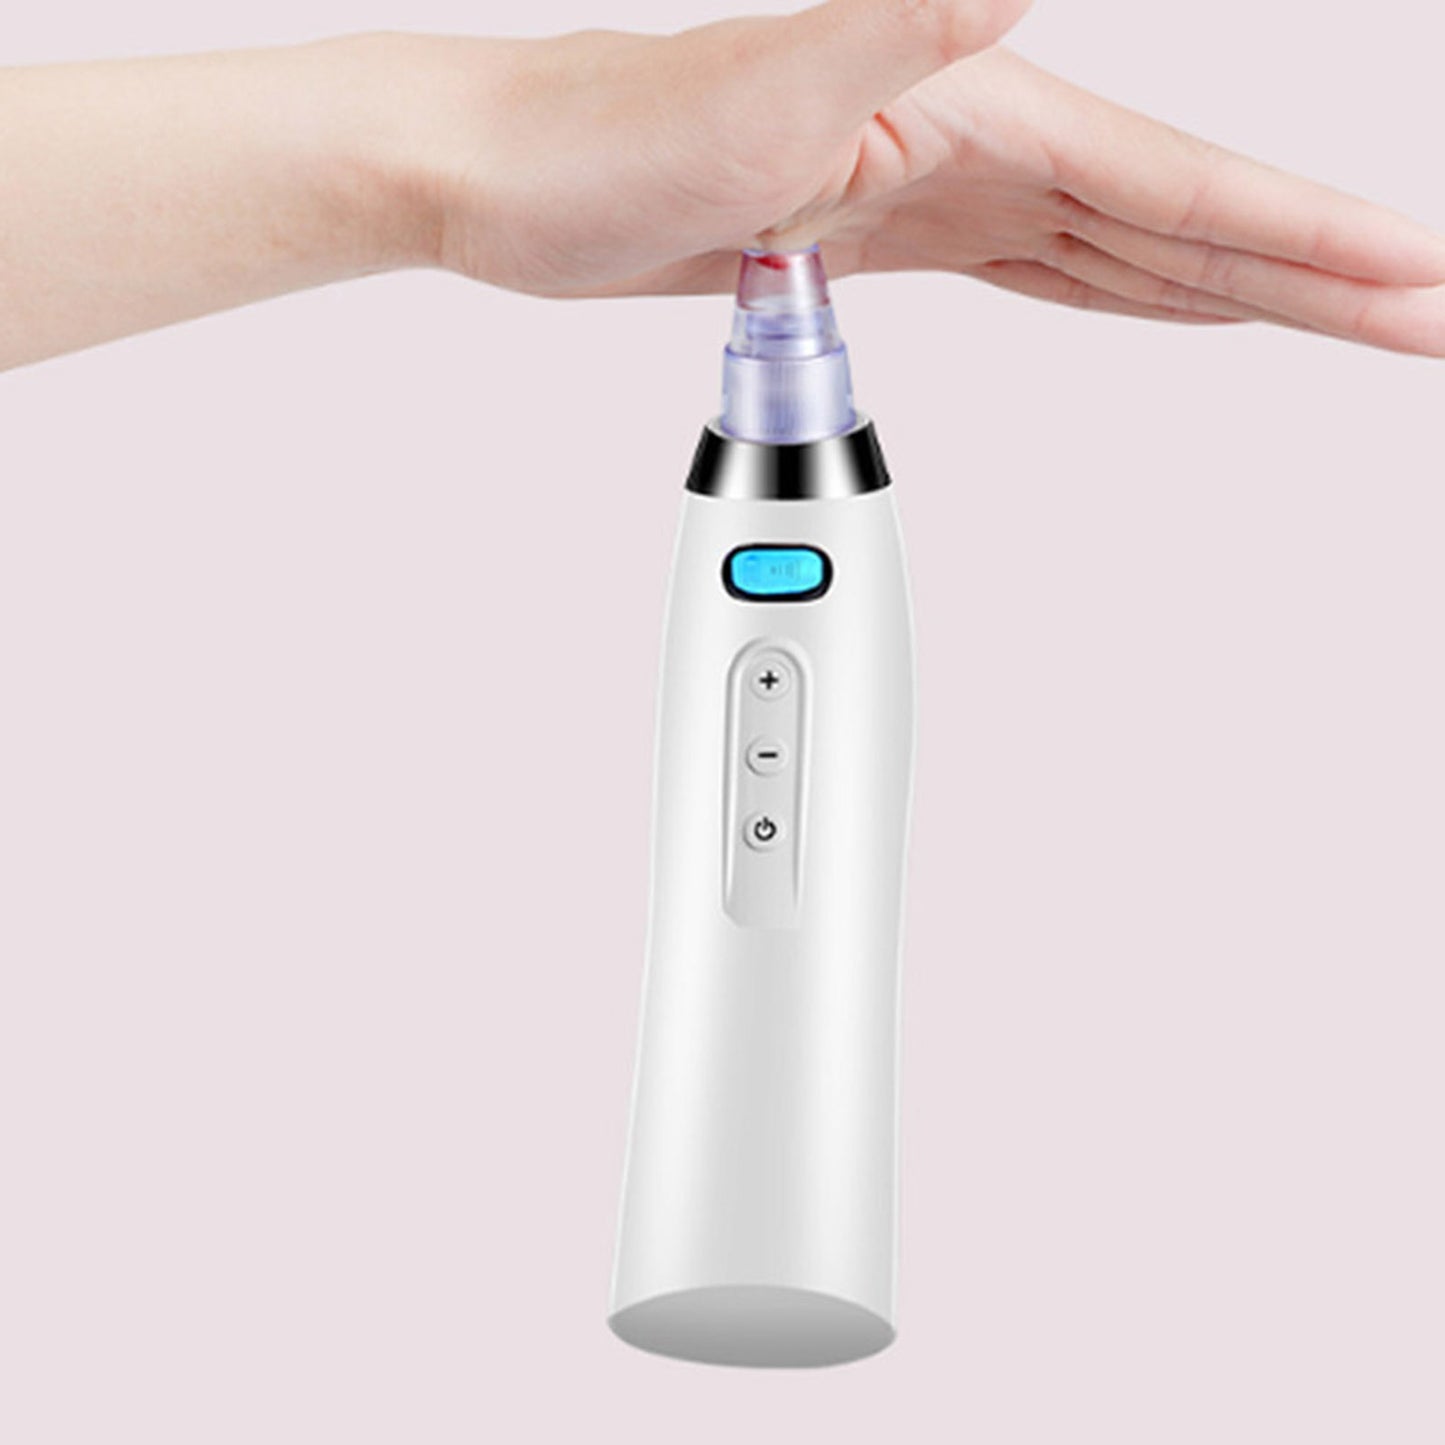 ClearSkin Pro: USB Rechargeable Blackhead Vacuum Extractor for Effortless Pore Cleansing